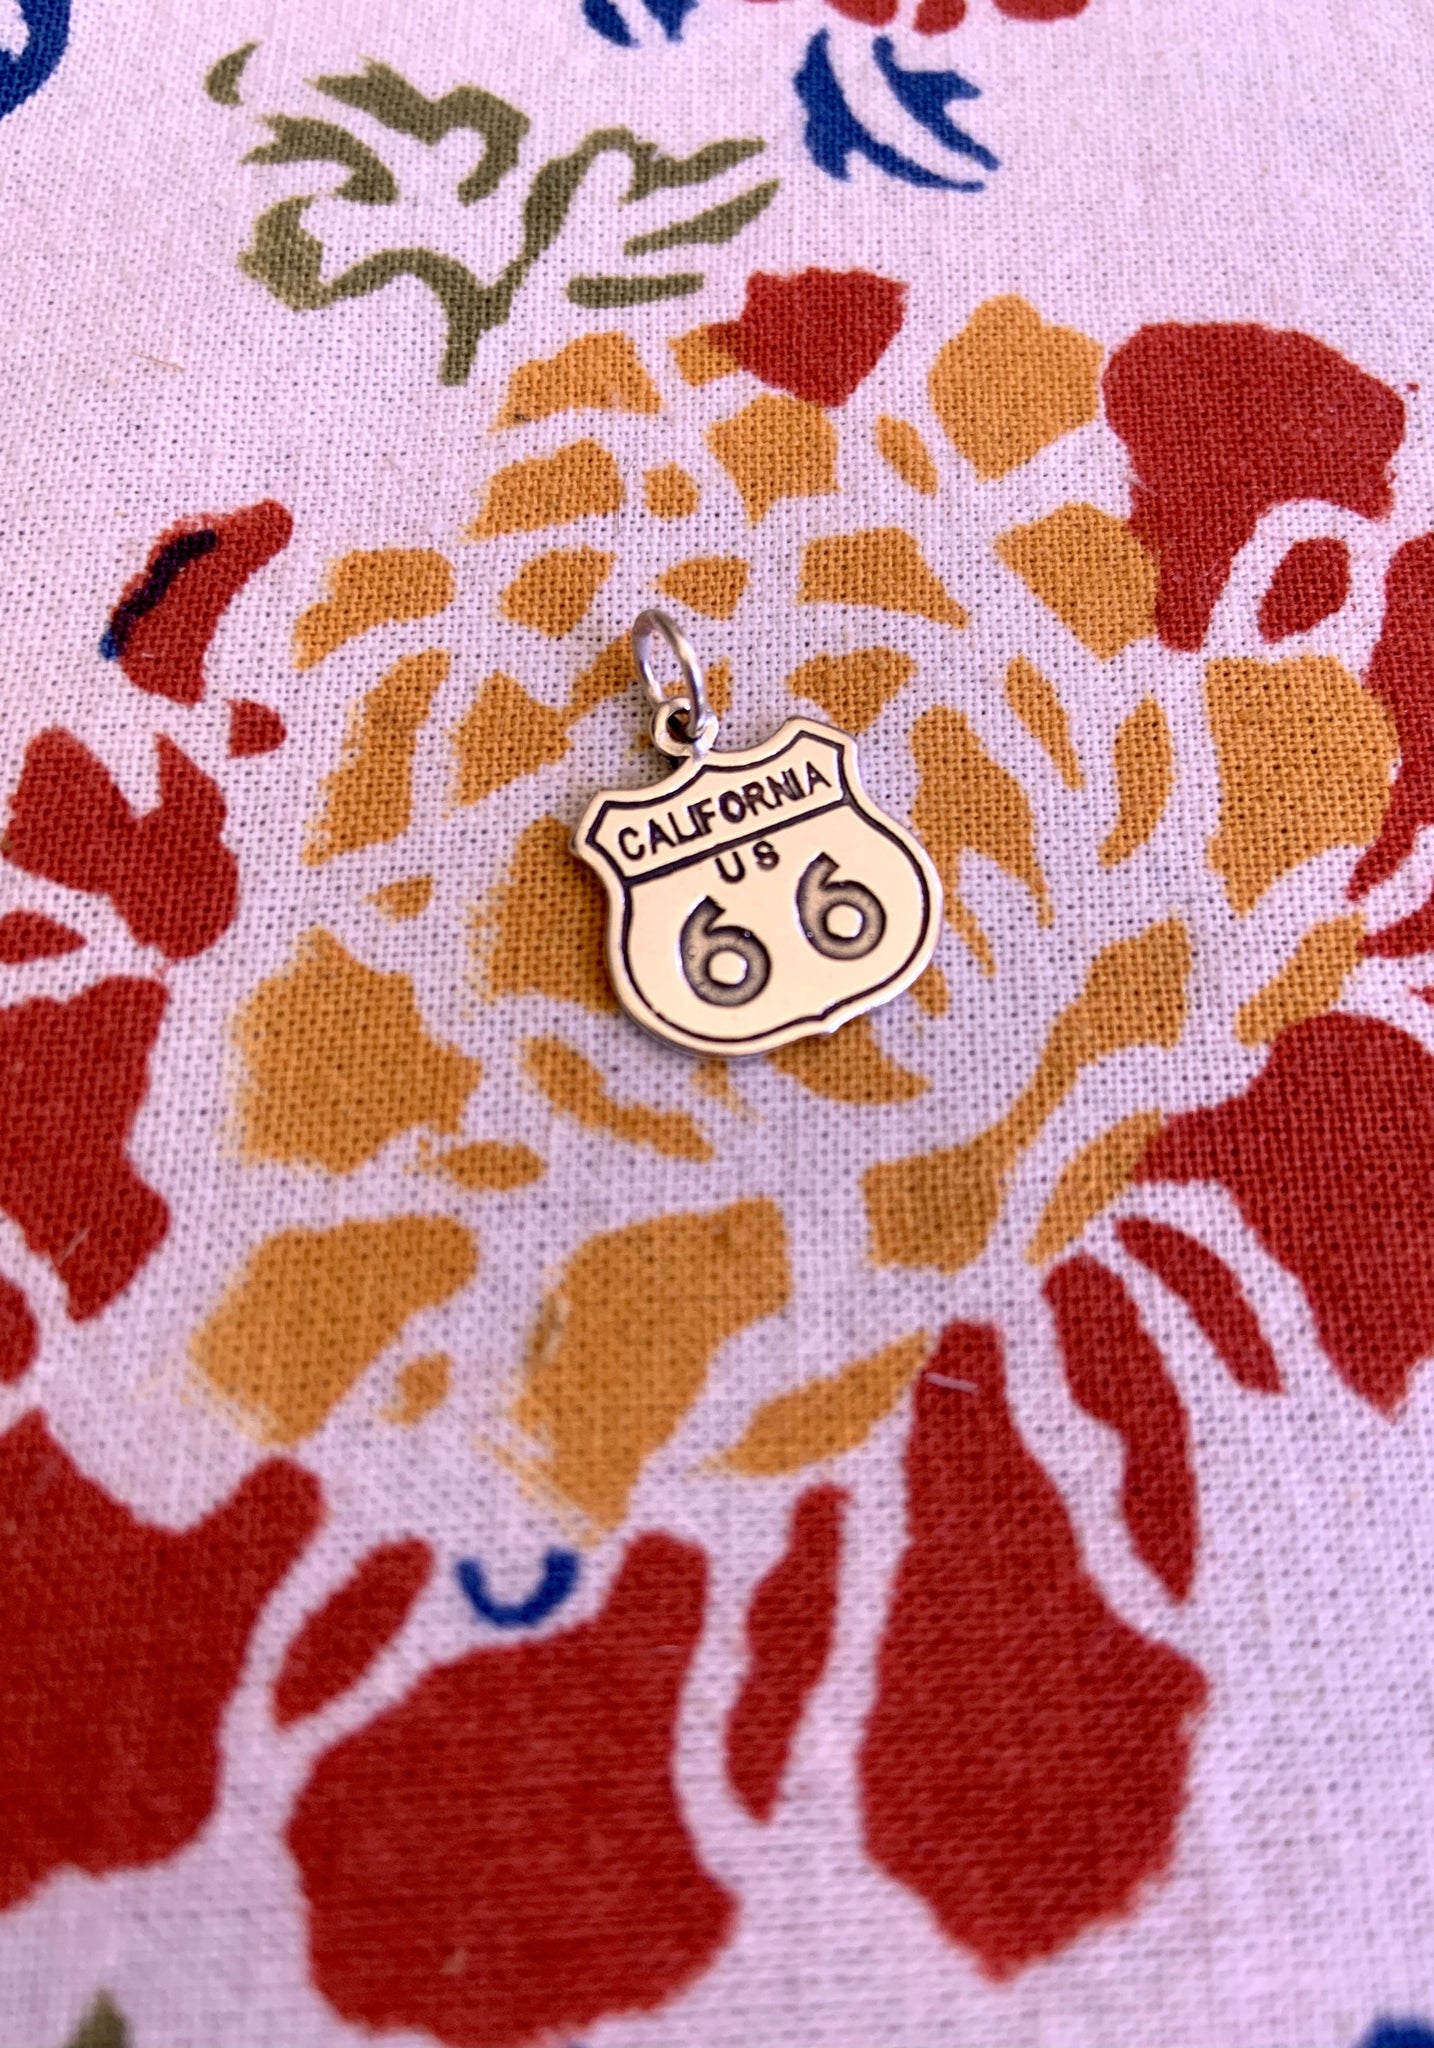 Route 66 Charm